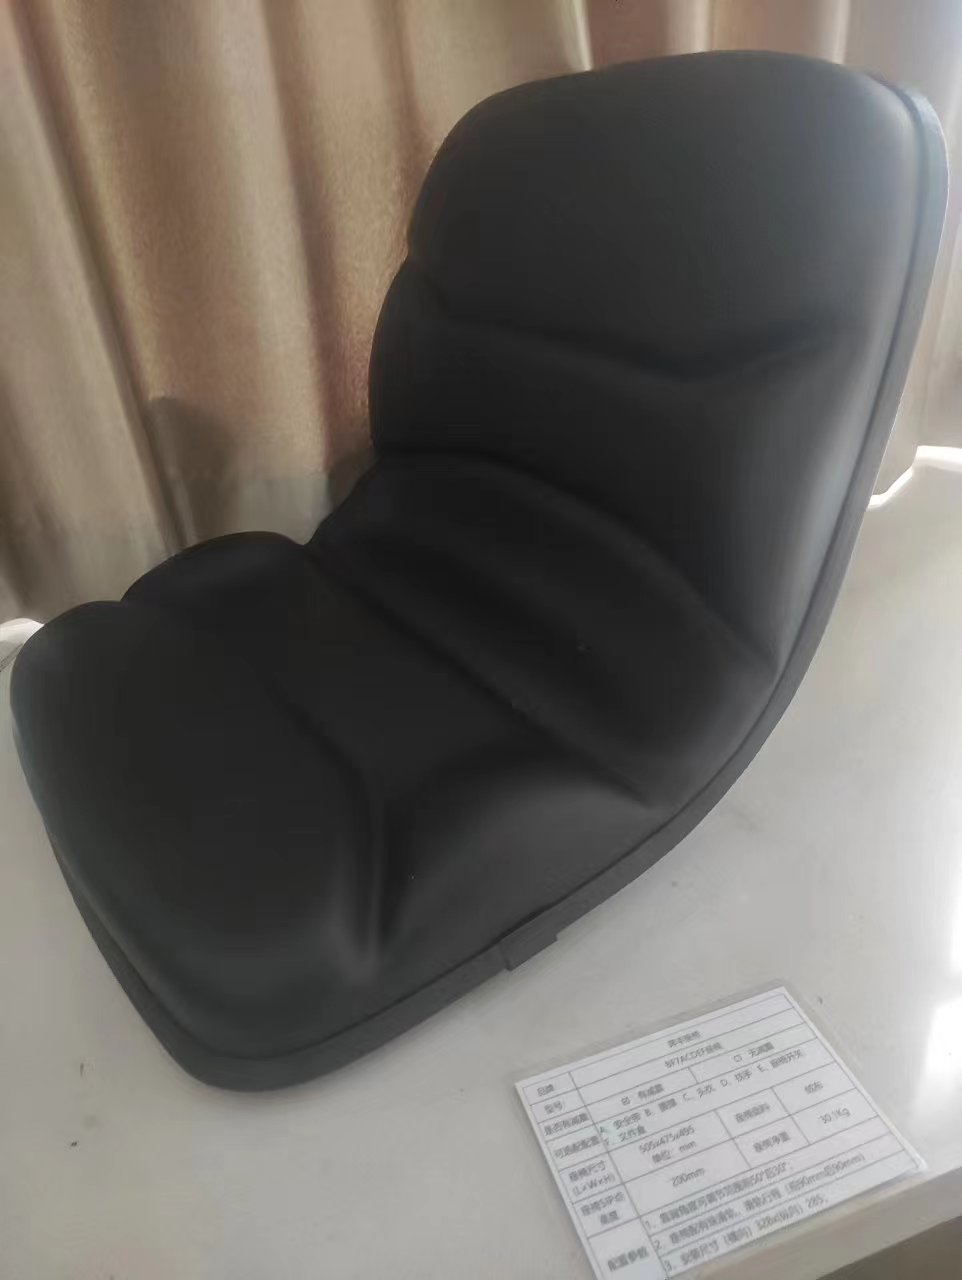 Newly launched PVC Cover Economical Tractor Seat For Most Inductrial and Agriculture,Clening Equipmet